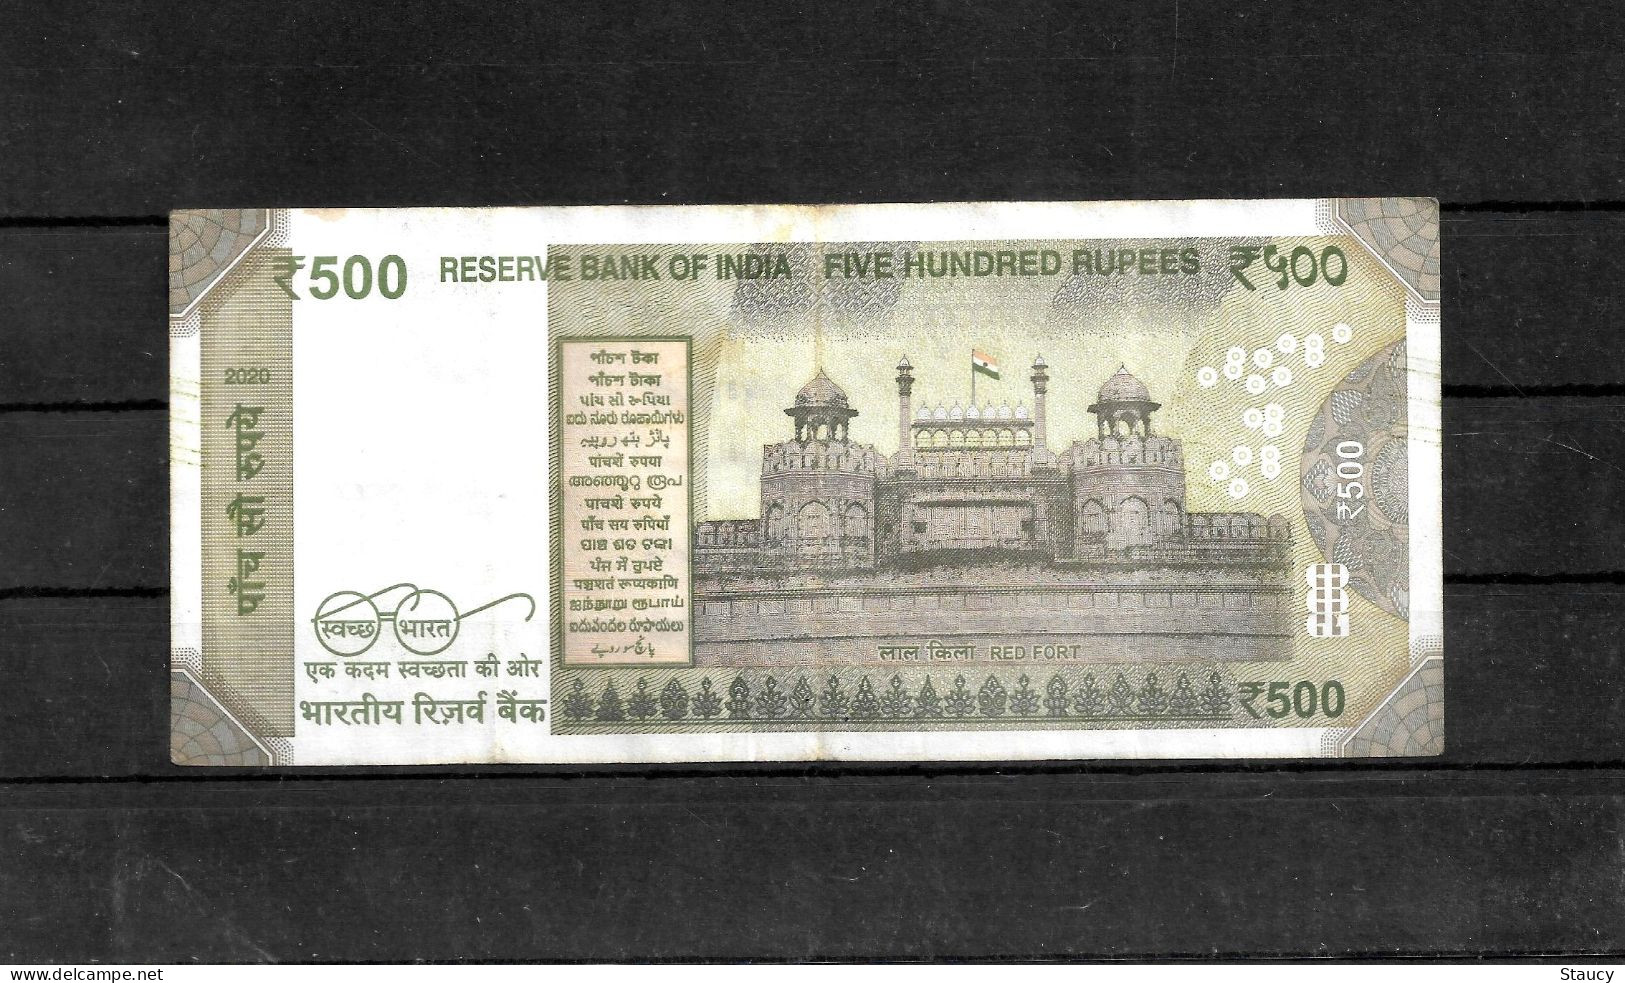 INDIA 2020 Rs. 500.00 Rupees Note Fancy / Holy / Religious Number "786" 731786" USED 100% Genuine Guaranteed As Per Scan - Indien